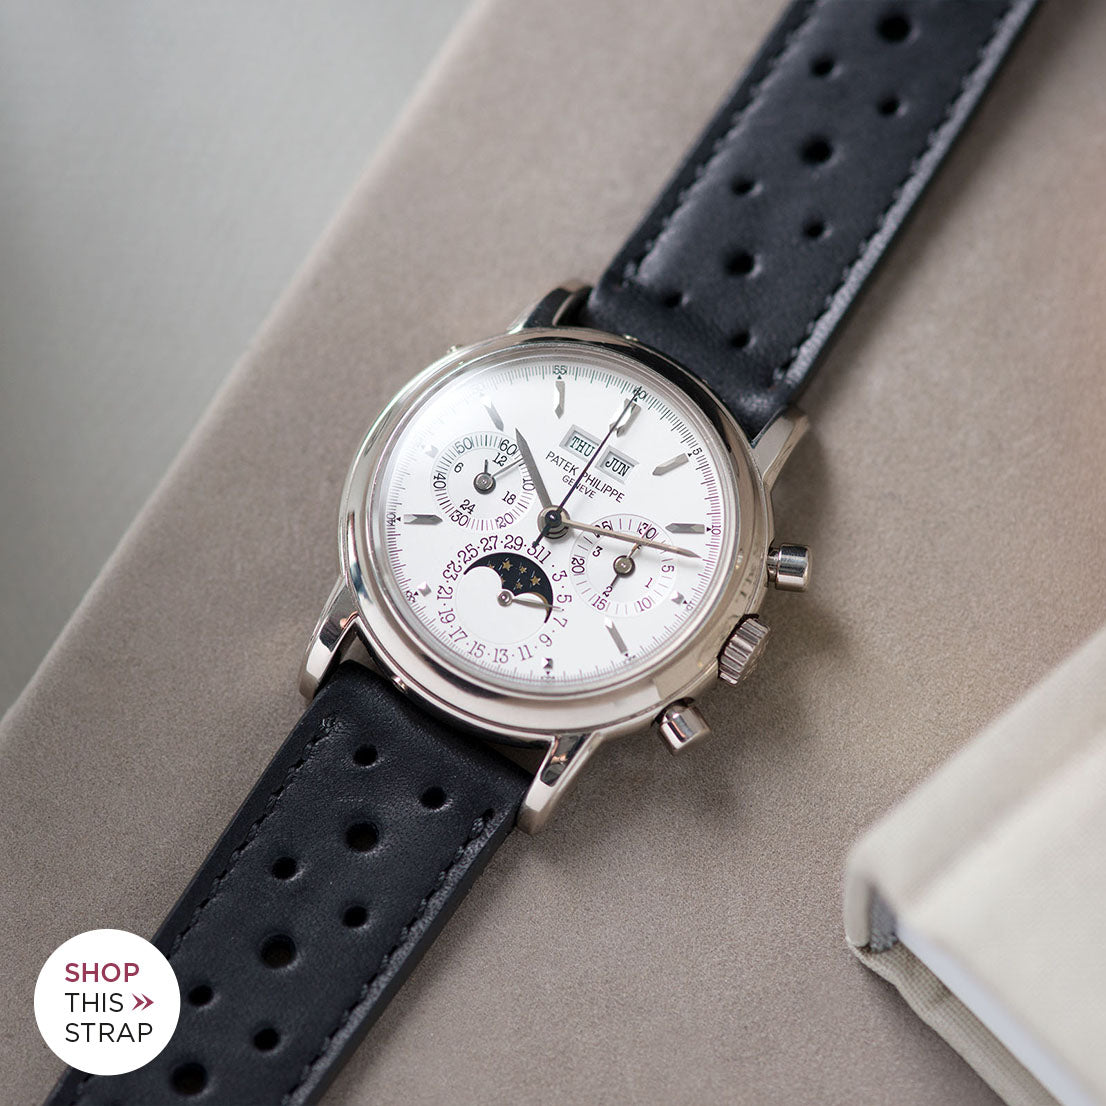 Bulang and Sons_Strap Guide_The Patek Philippe 3970 G White Gold Perpetual Calendar_Racing Black Leather Watch Strap